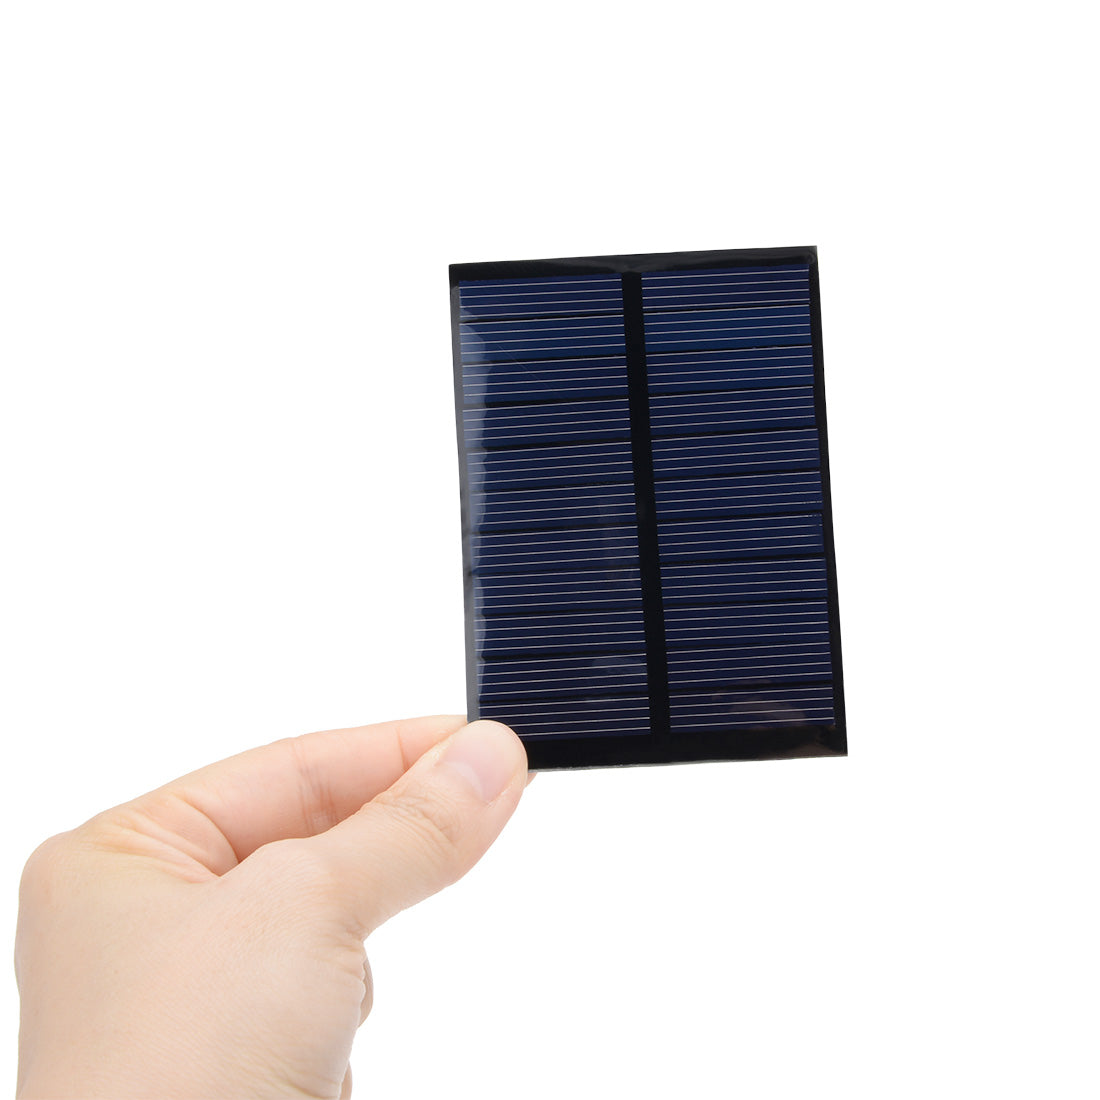 uxcell Uxcell 5Pcs 5.5V 80mA Poly Mini Solar Cell Panel Module DIY for Phone Light Toys Charger 84mm x 61mm